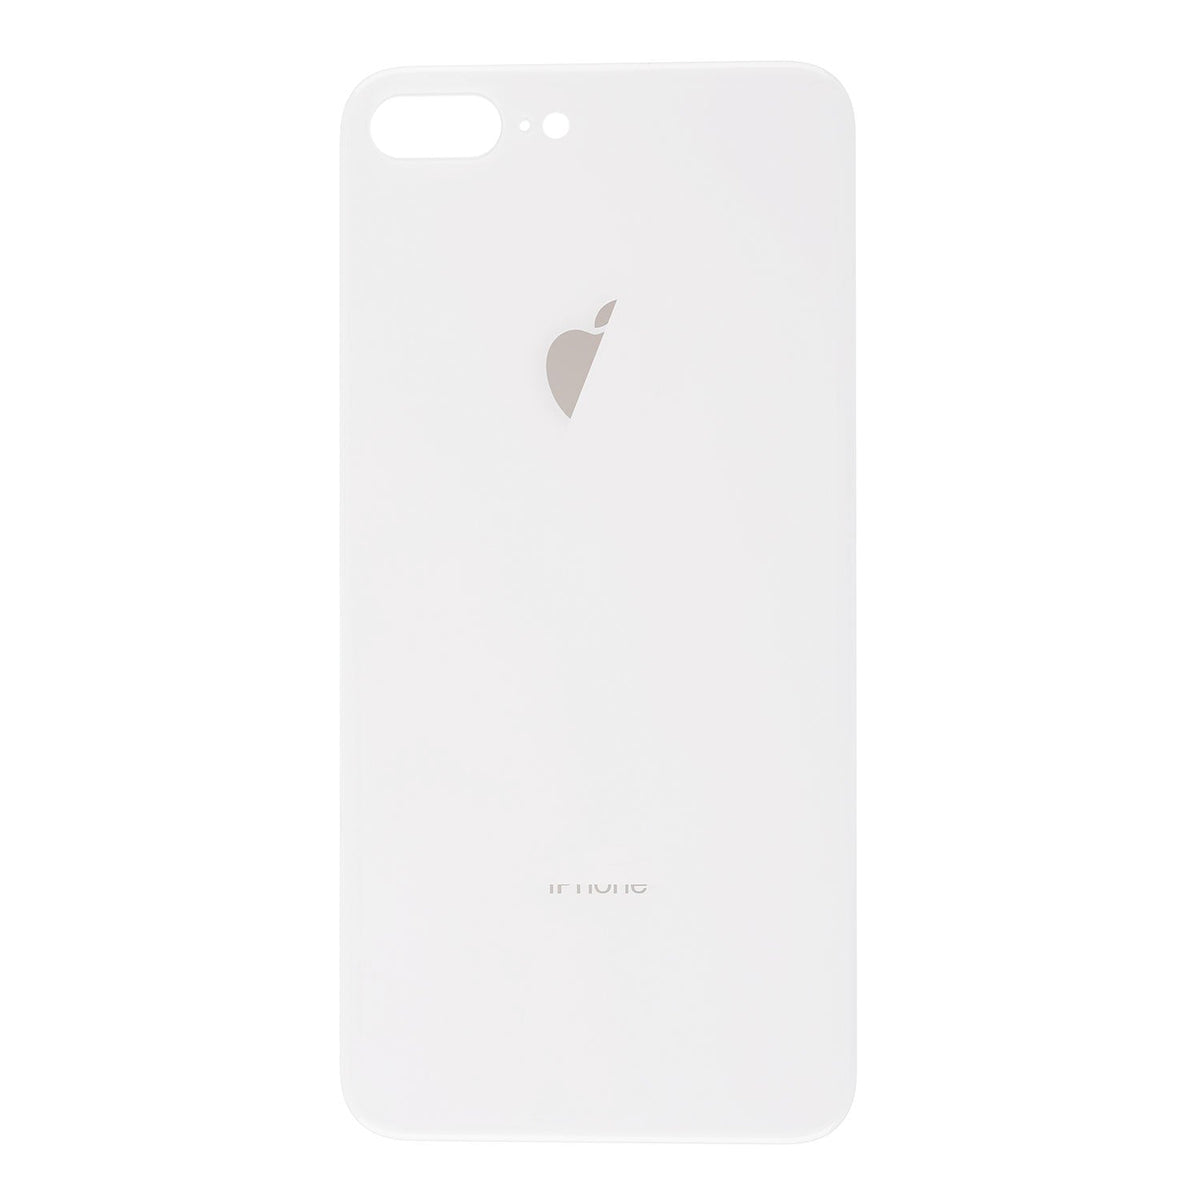 SILVER BACK COVER FOR IPHONE 8 PLUS